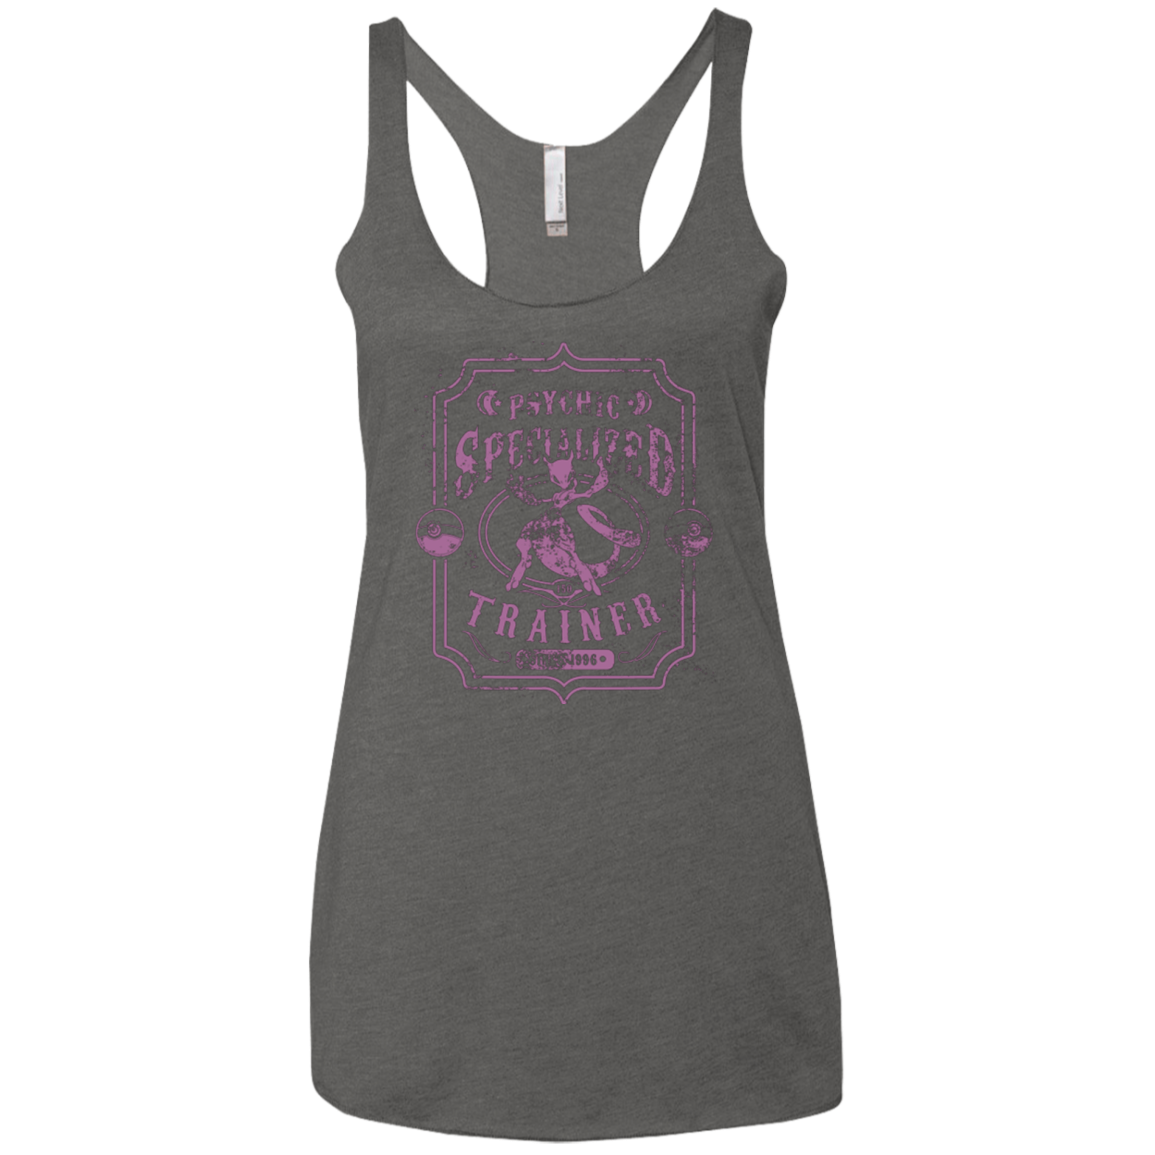 Psychic Specialized Trainer 2 Women's Triblend Racerback Tank